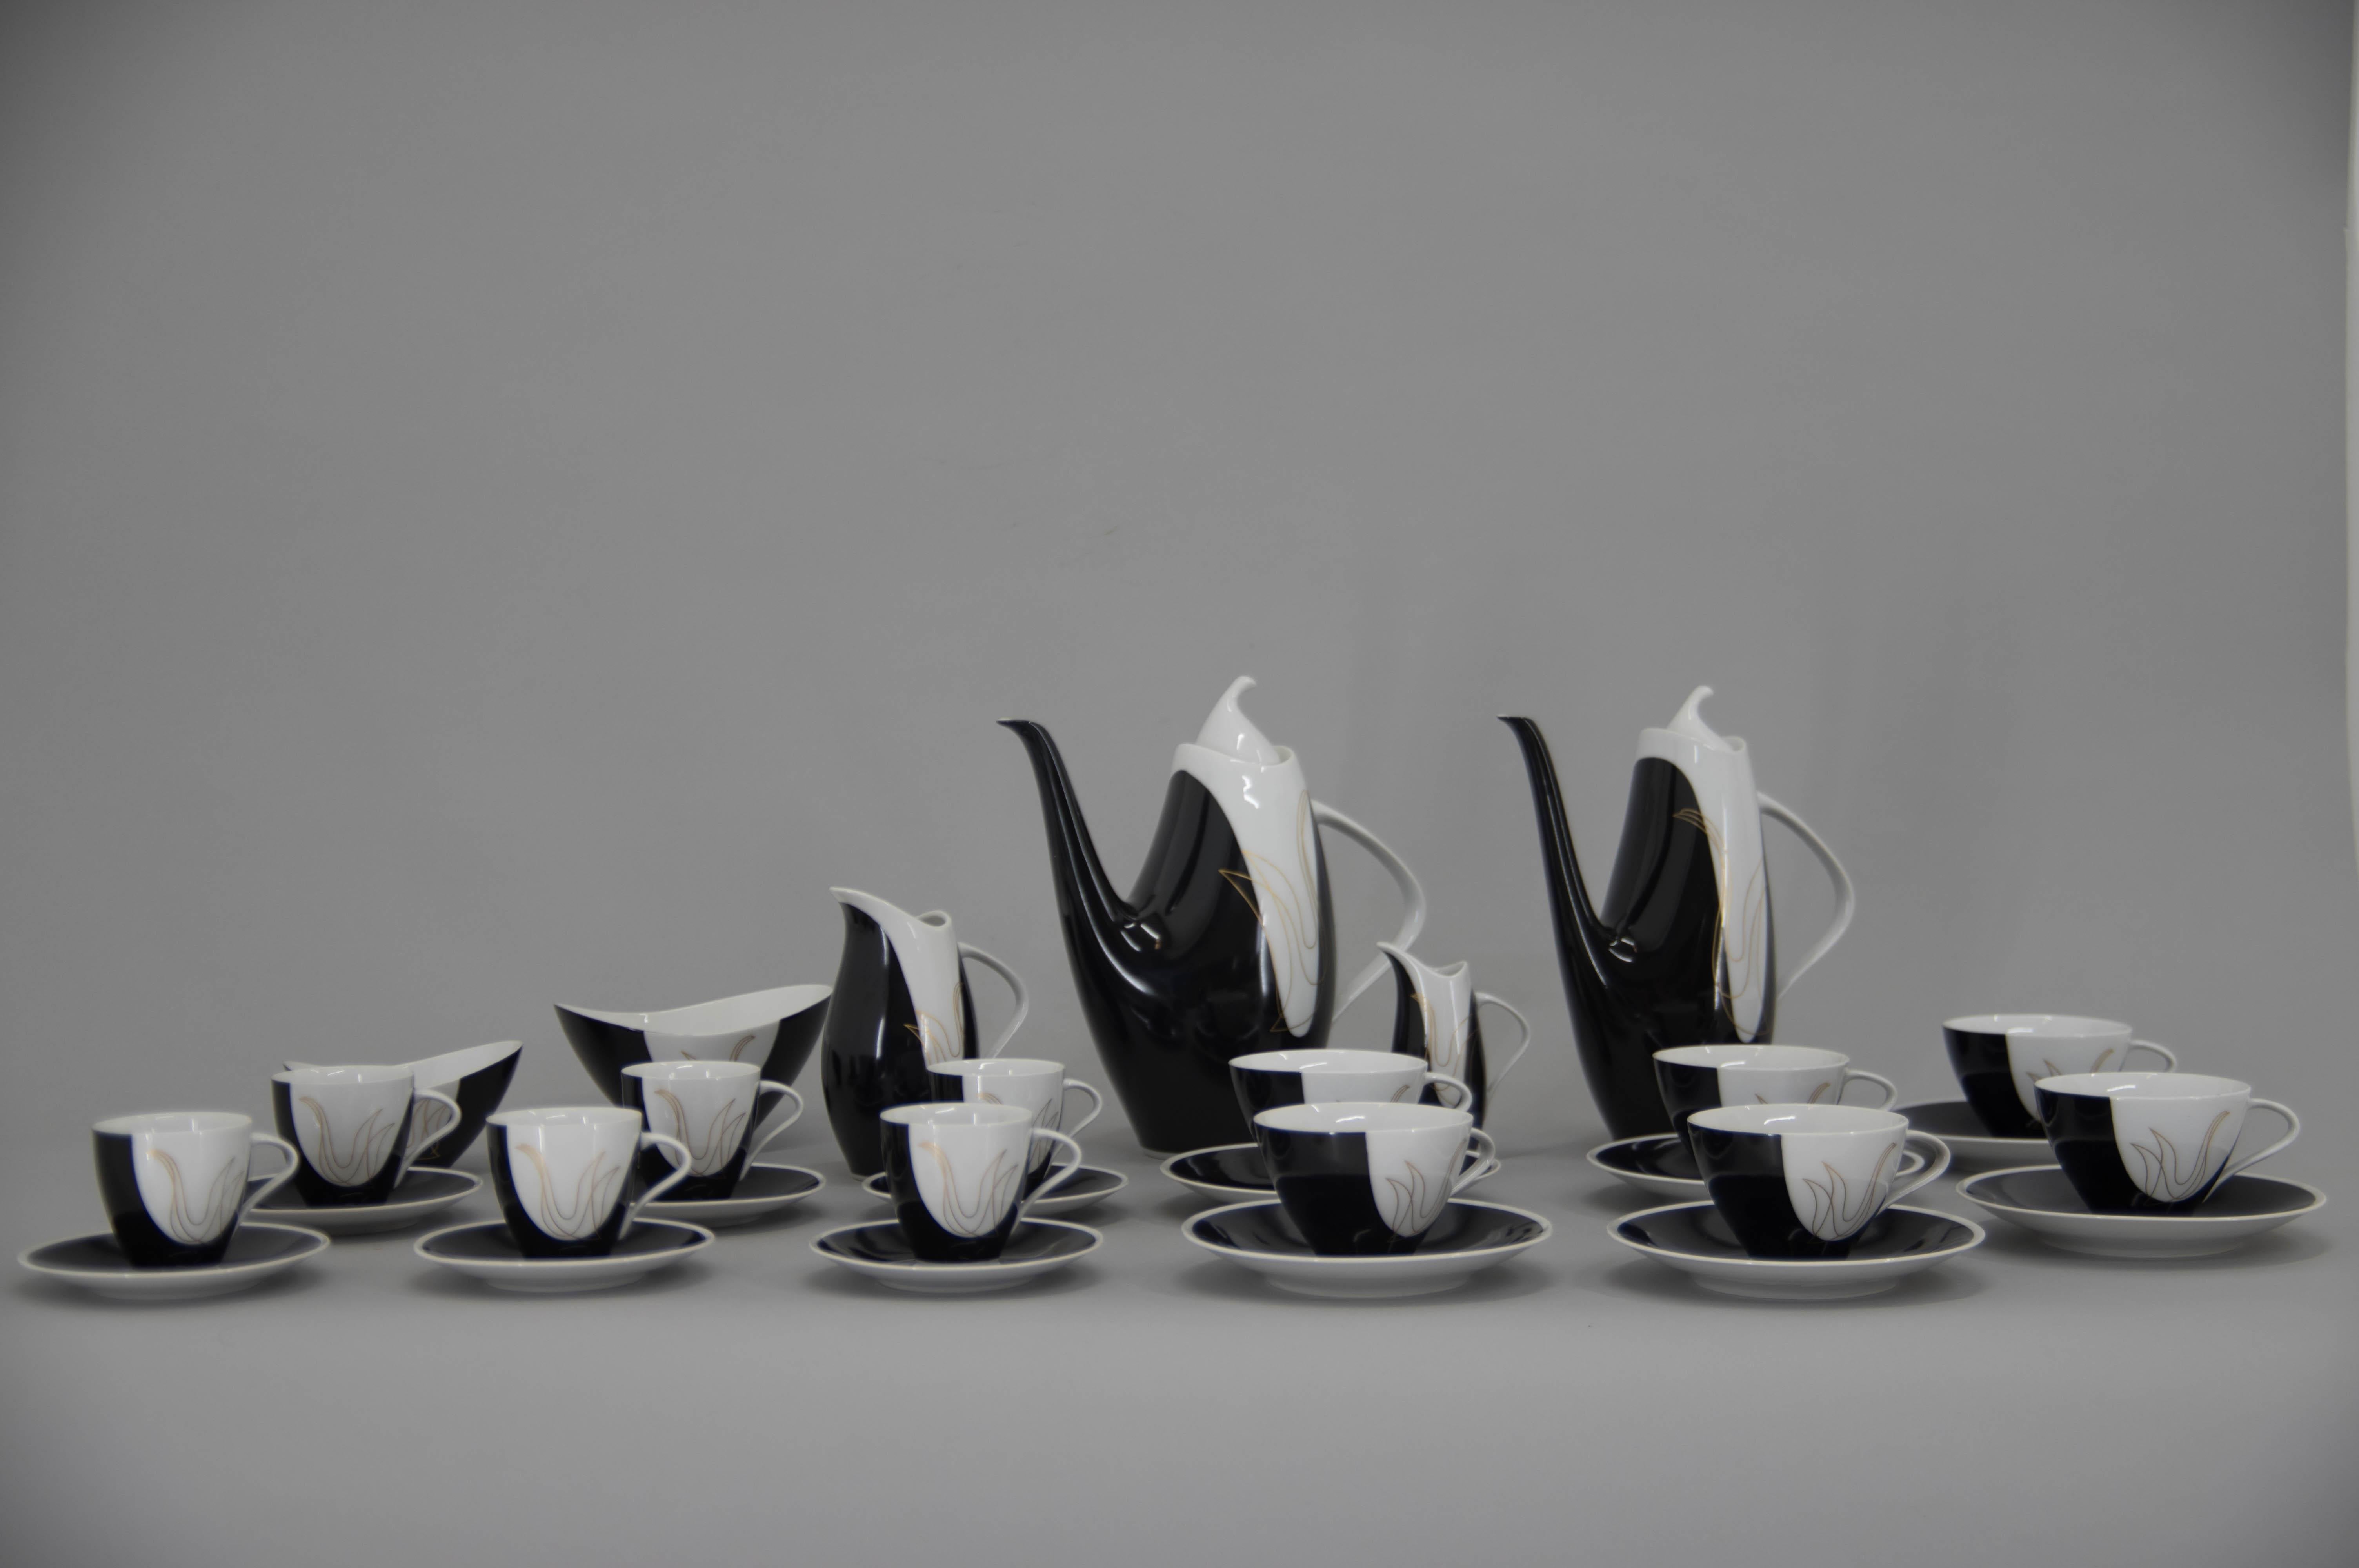 Elka coffee and tea set designed by Jaroslav Jezek in 1957
Awarded by Grand Prix at the Expo 1958
Manufactured and marked by Brezova - Pirkenhammer
6 tea cups with plates
6 coffee cups with plates
1 tea pot
1 coffee pot
1 cream pot
2 sugar bowls
1